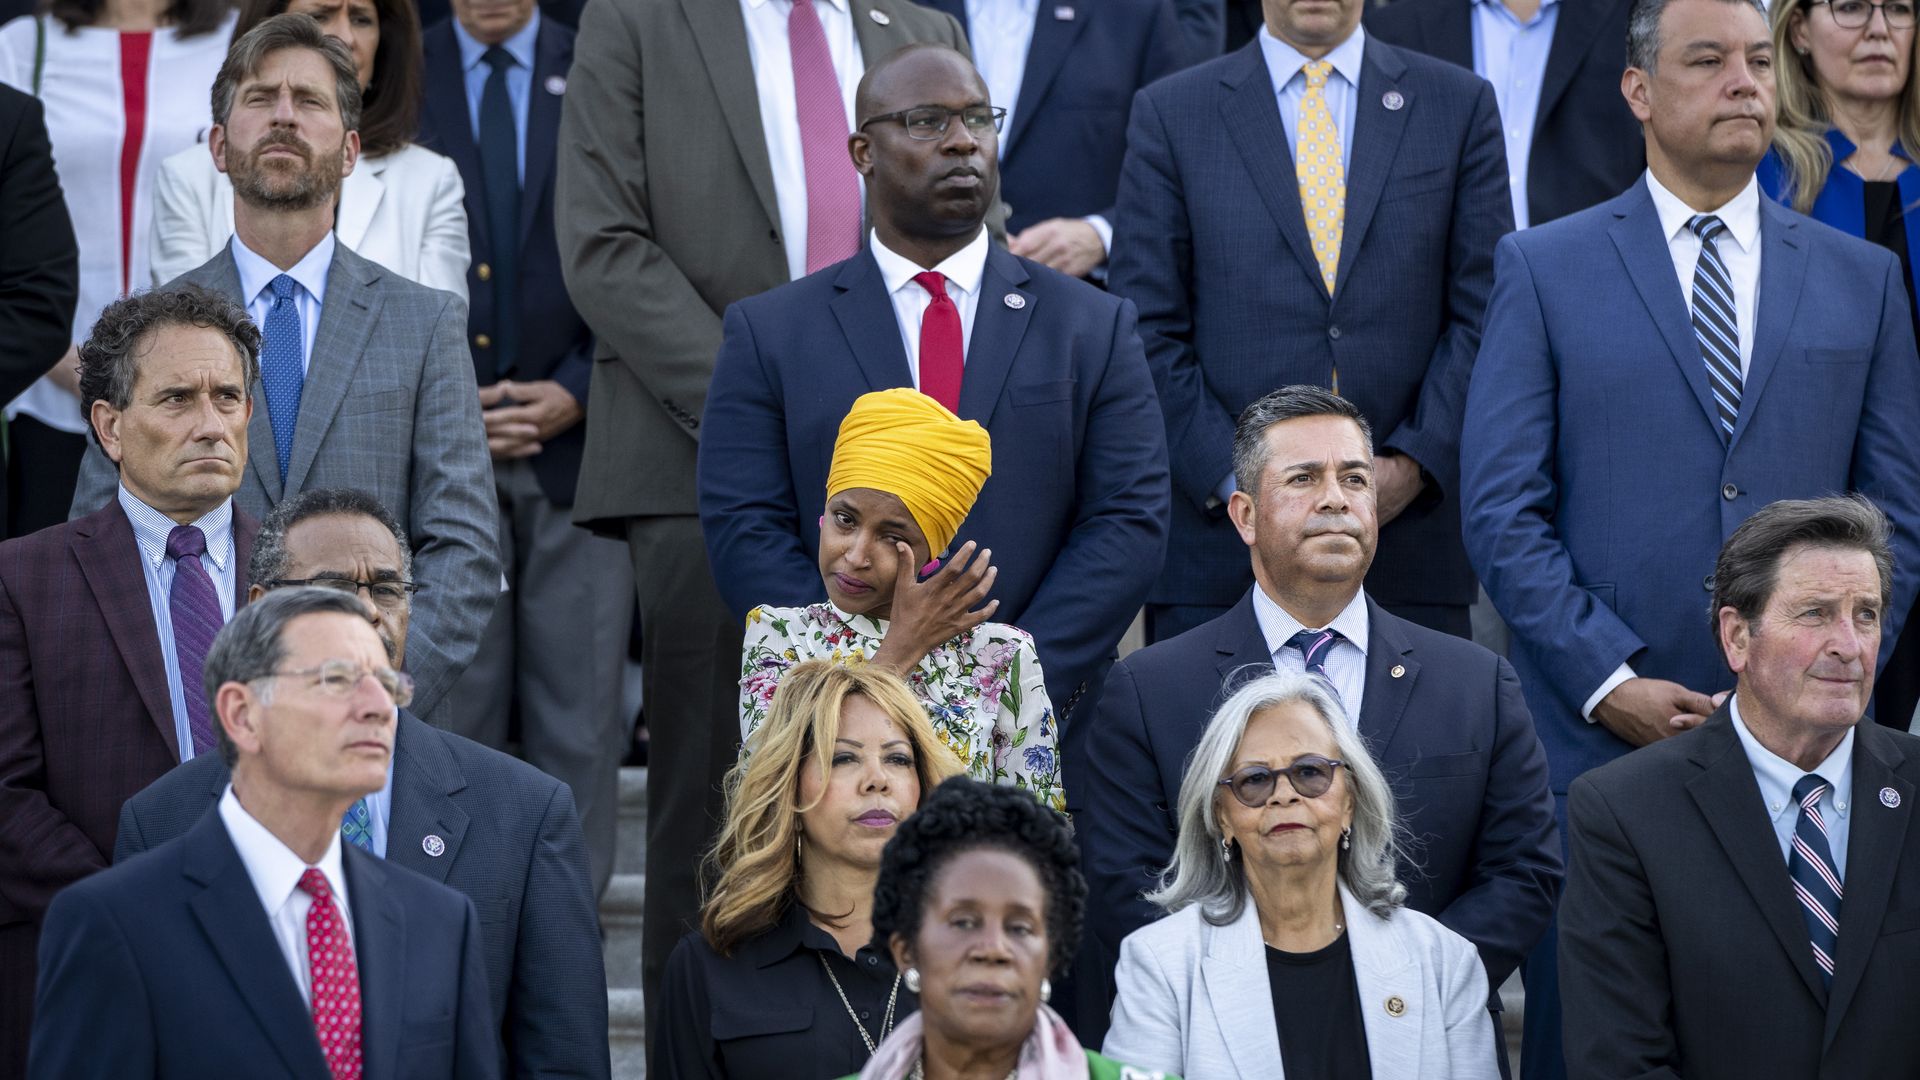 Rep. Ilhan Omar (D-MN) tears up as members of Congress hold a moment of silence for the 600,000 American lives lost to COVID-19, on the steps of the U.S. Capitol on June 14